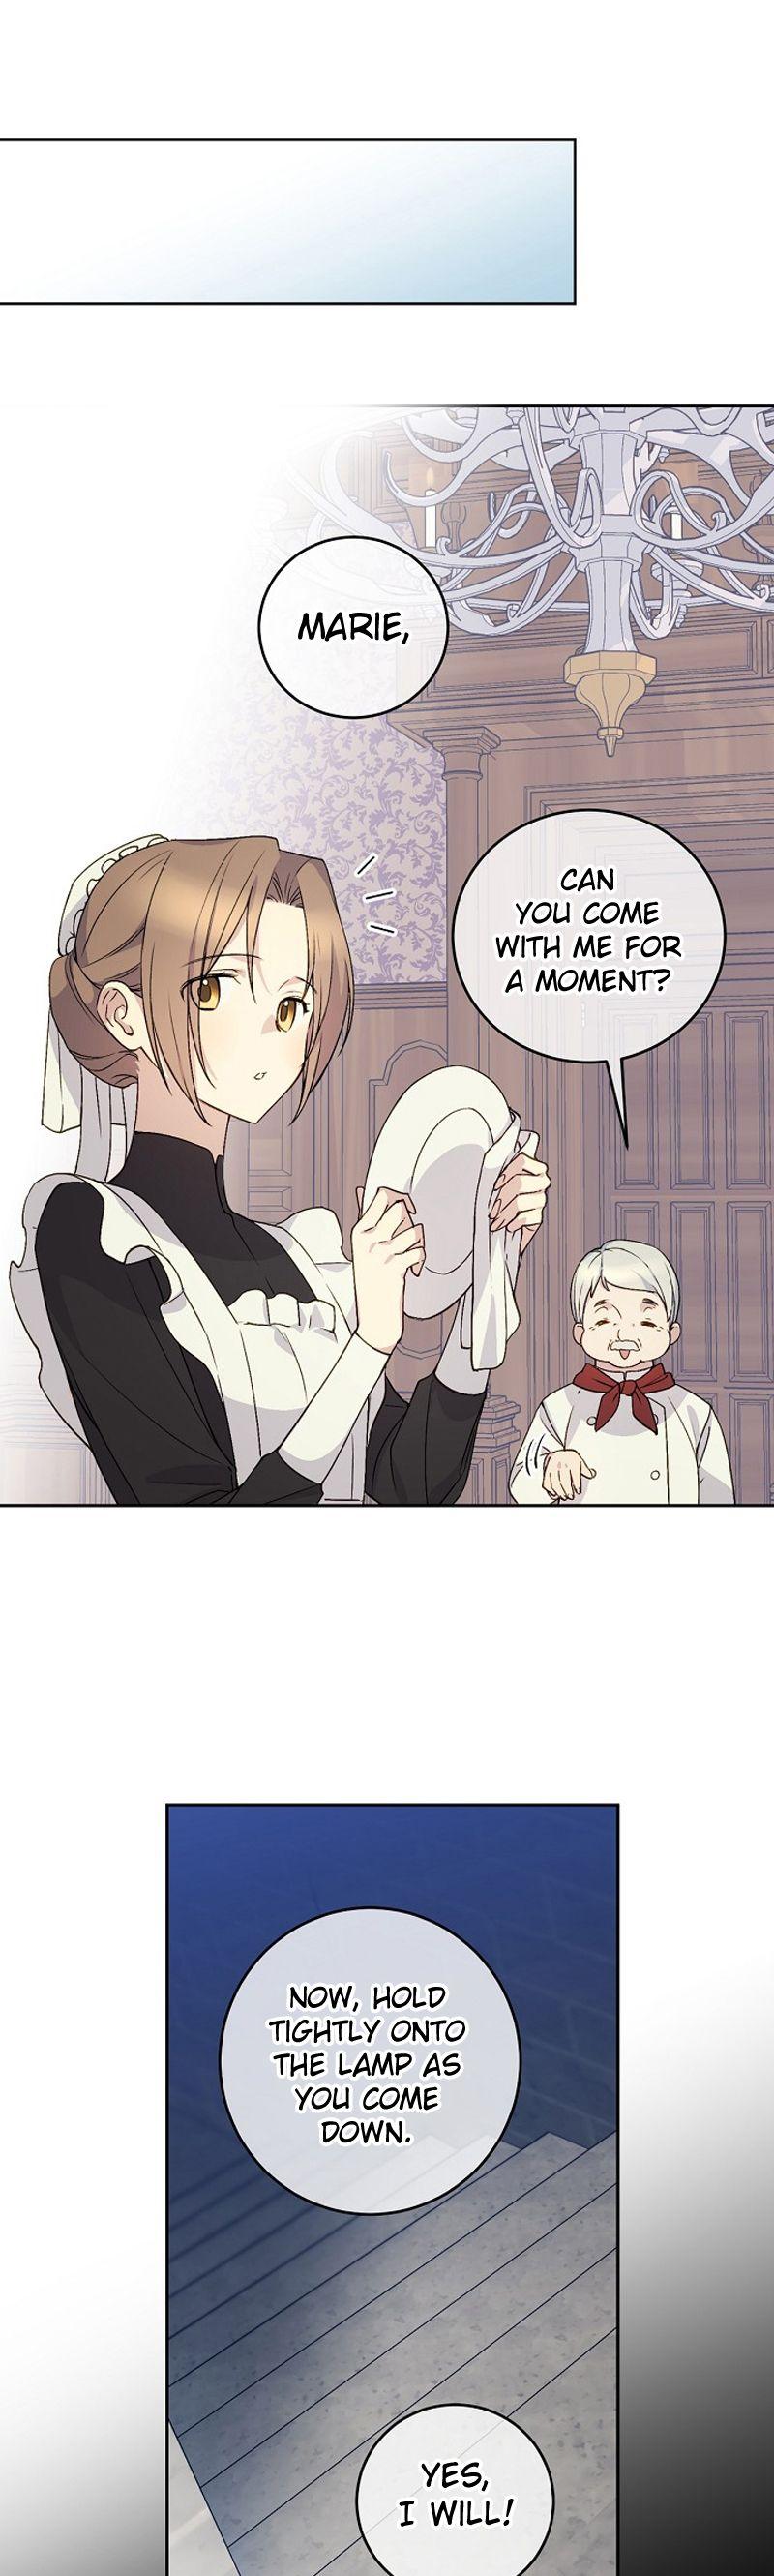 A Capable Maid chapter 12